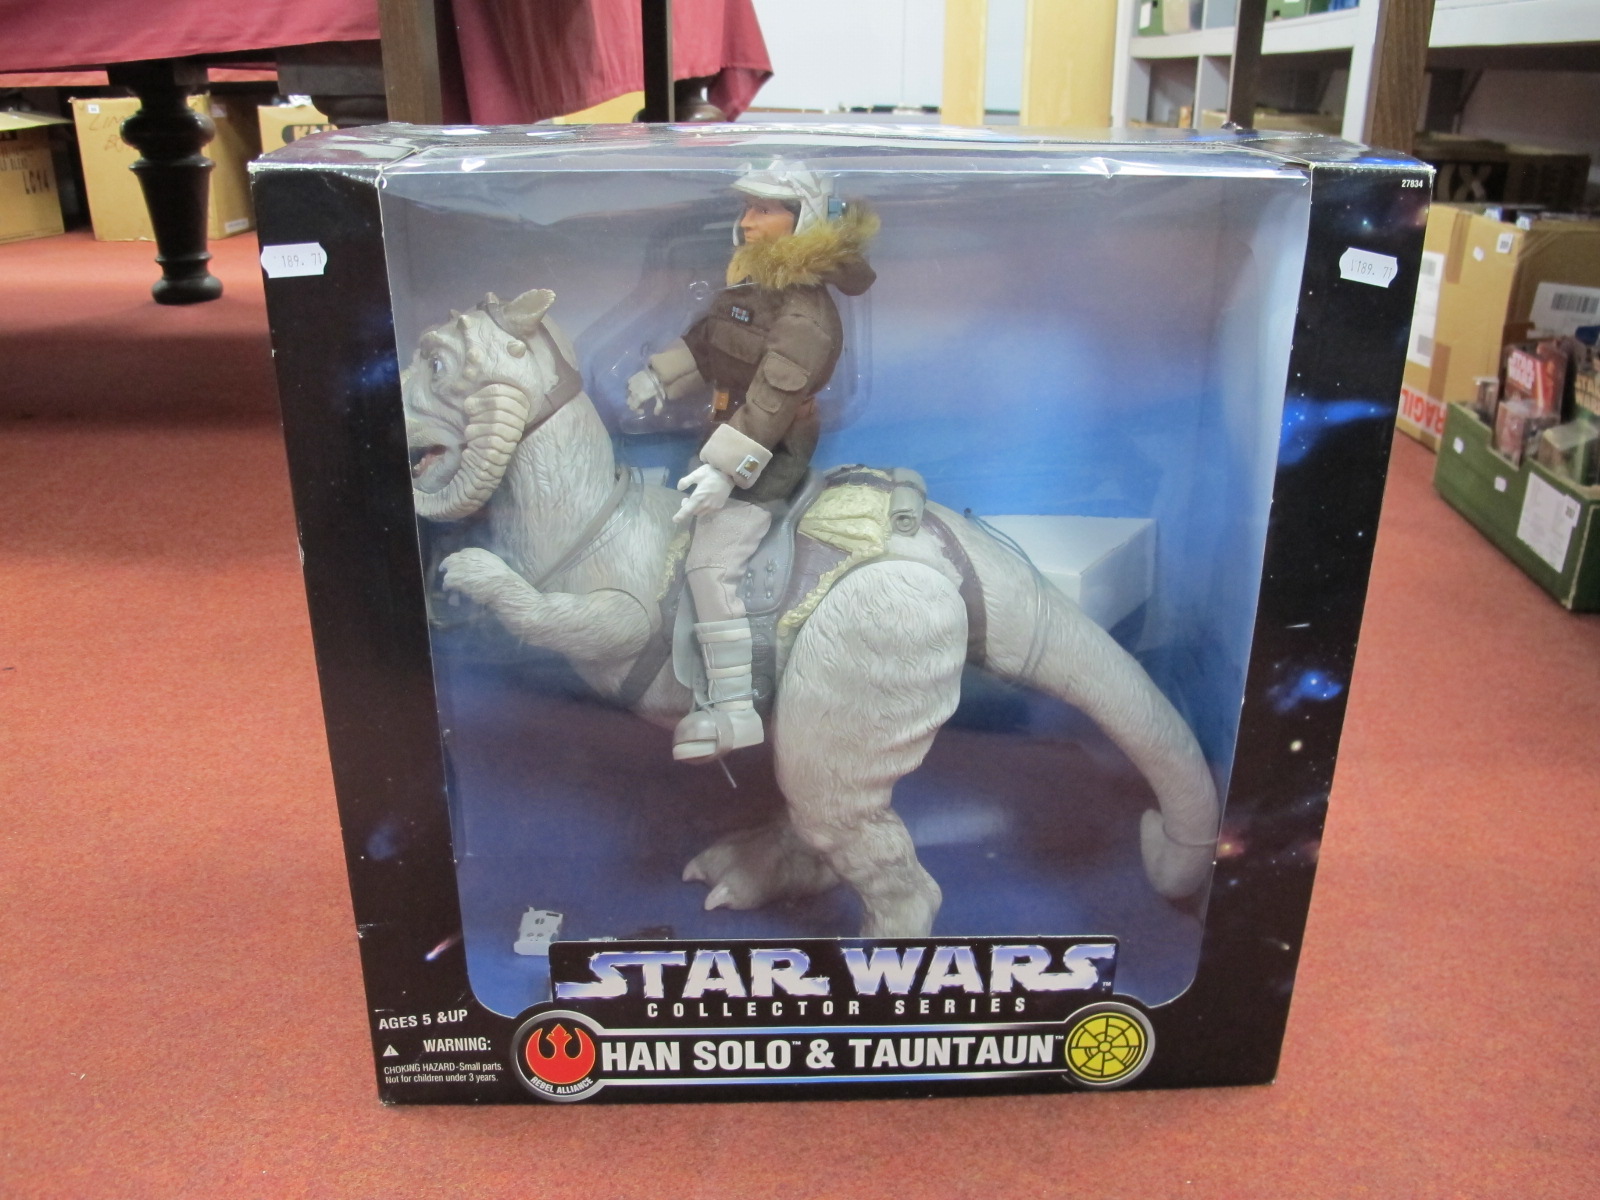 Boxed Star Wars Collector Series, Hans Solo and Tauntaun.